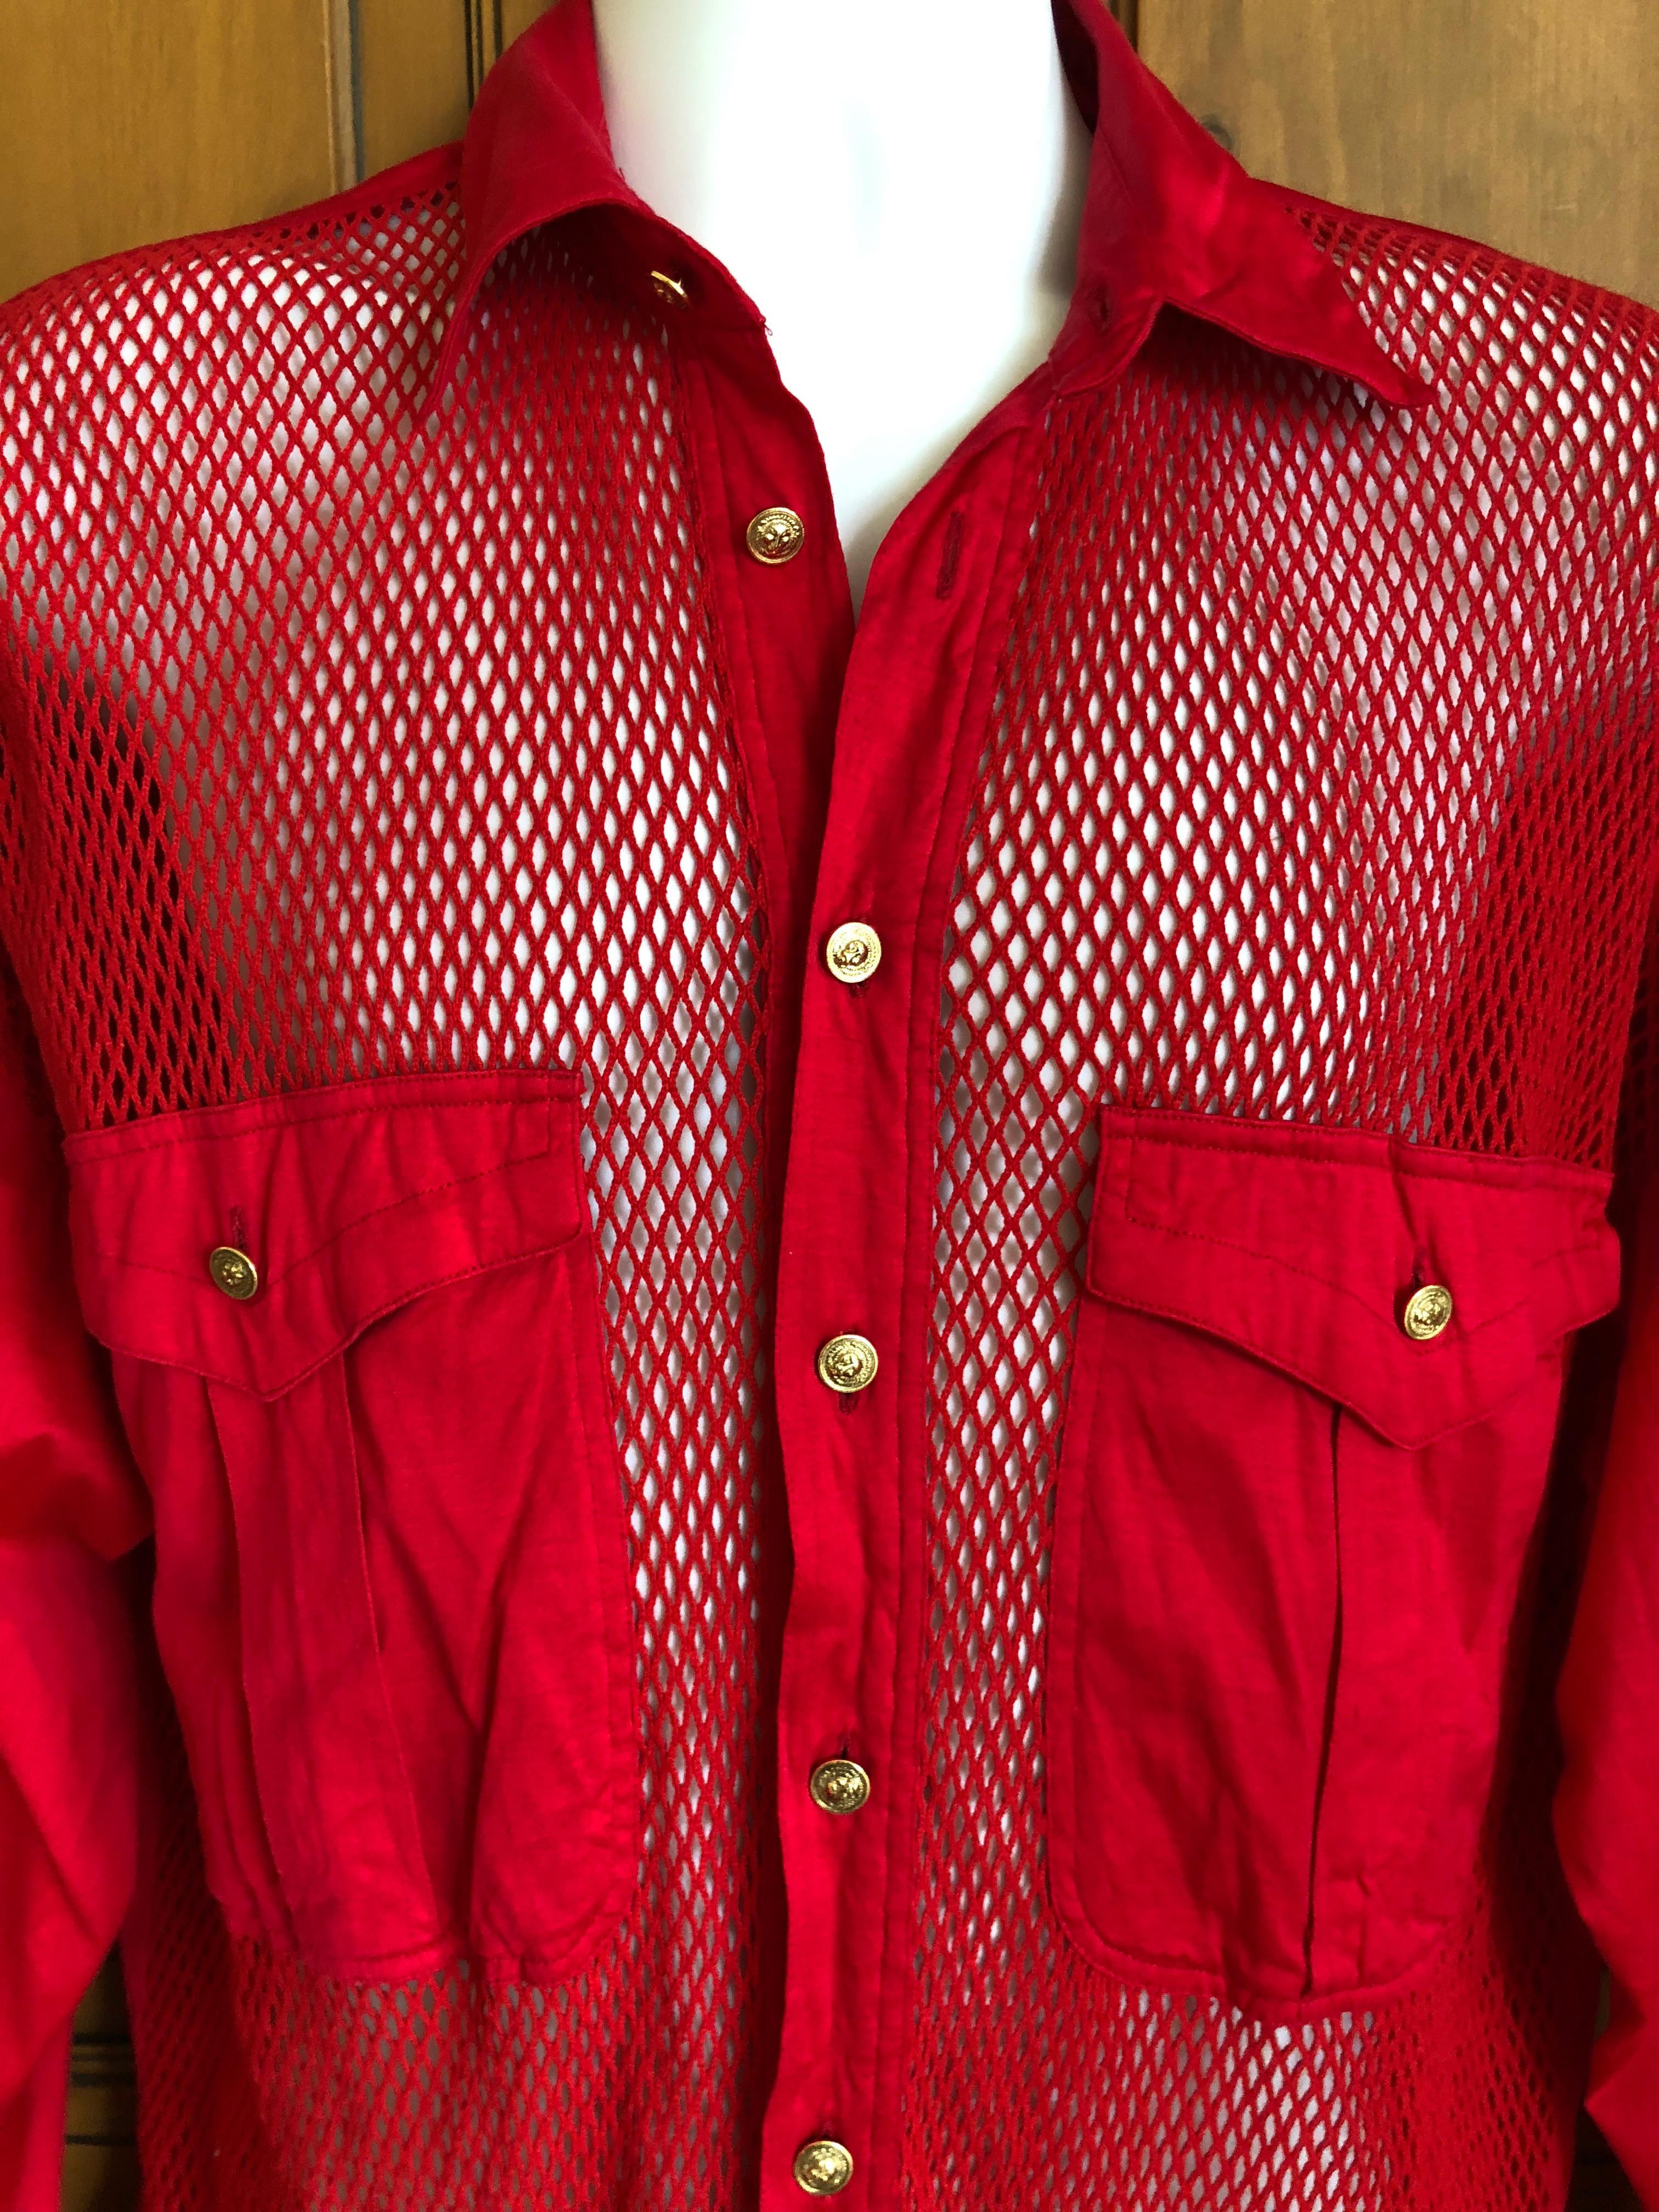 Versus Gianni Versace Rare 1993 Red Sheer Mesh Men's Large Shirt 

There is no size label, I would say it's a X large
Measurements ;

 Chest 48